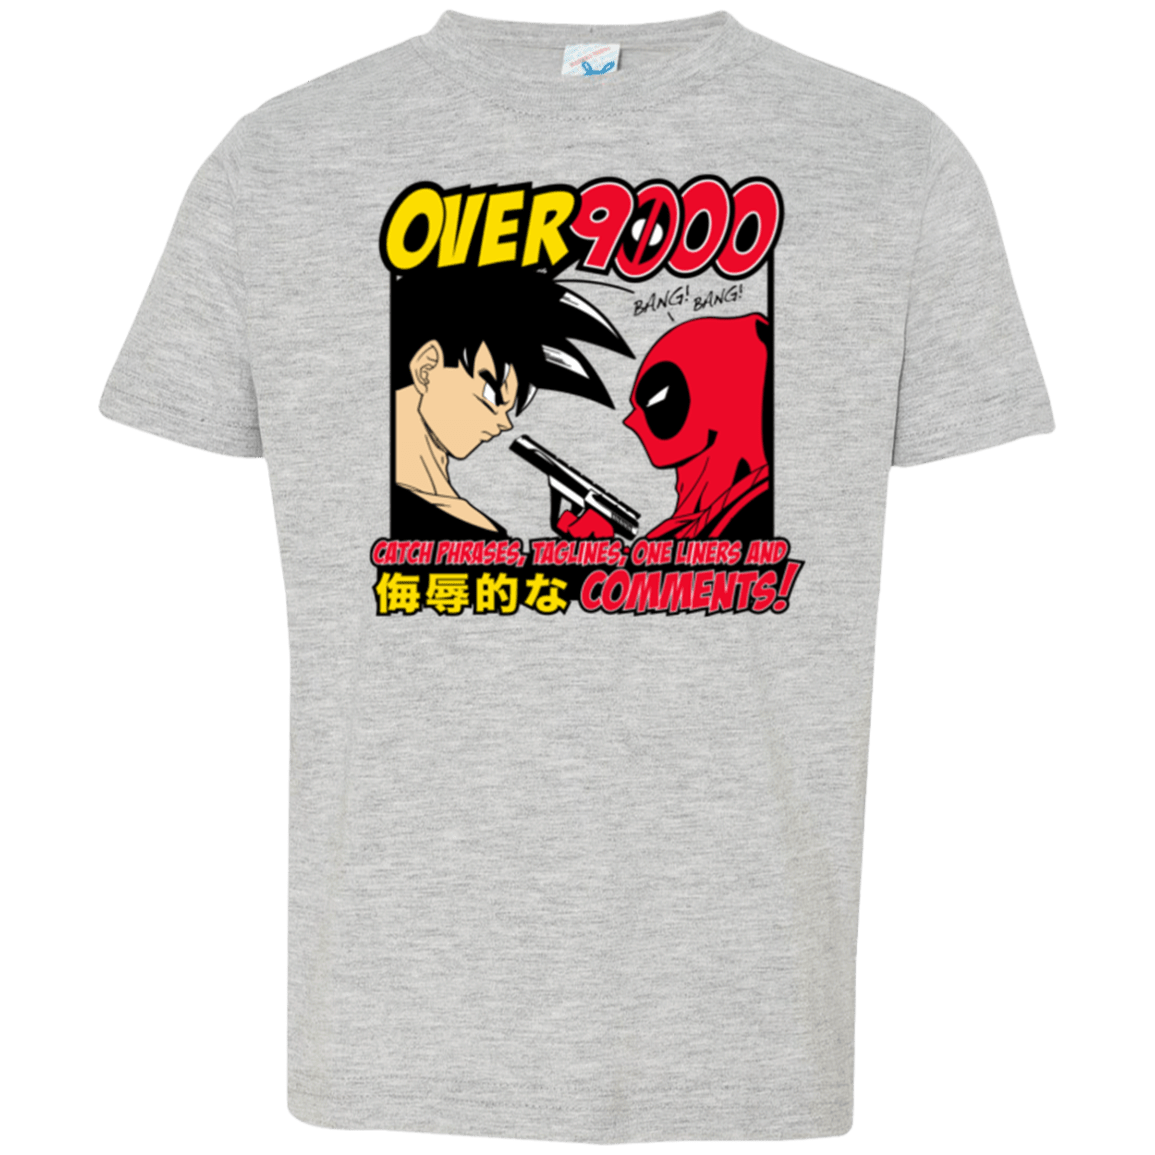 T-Shirts Heather / 2T Over 9000 Toddler Premium T-Shirt